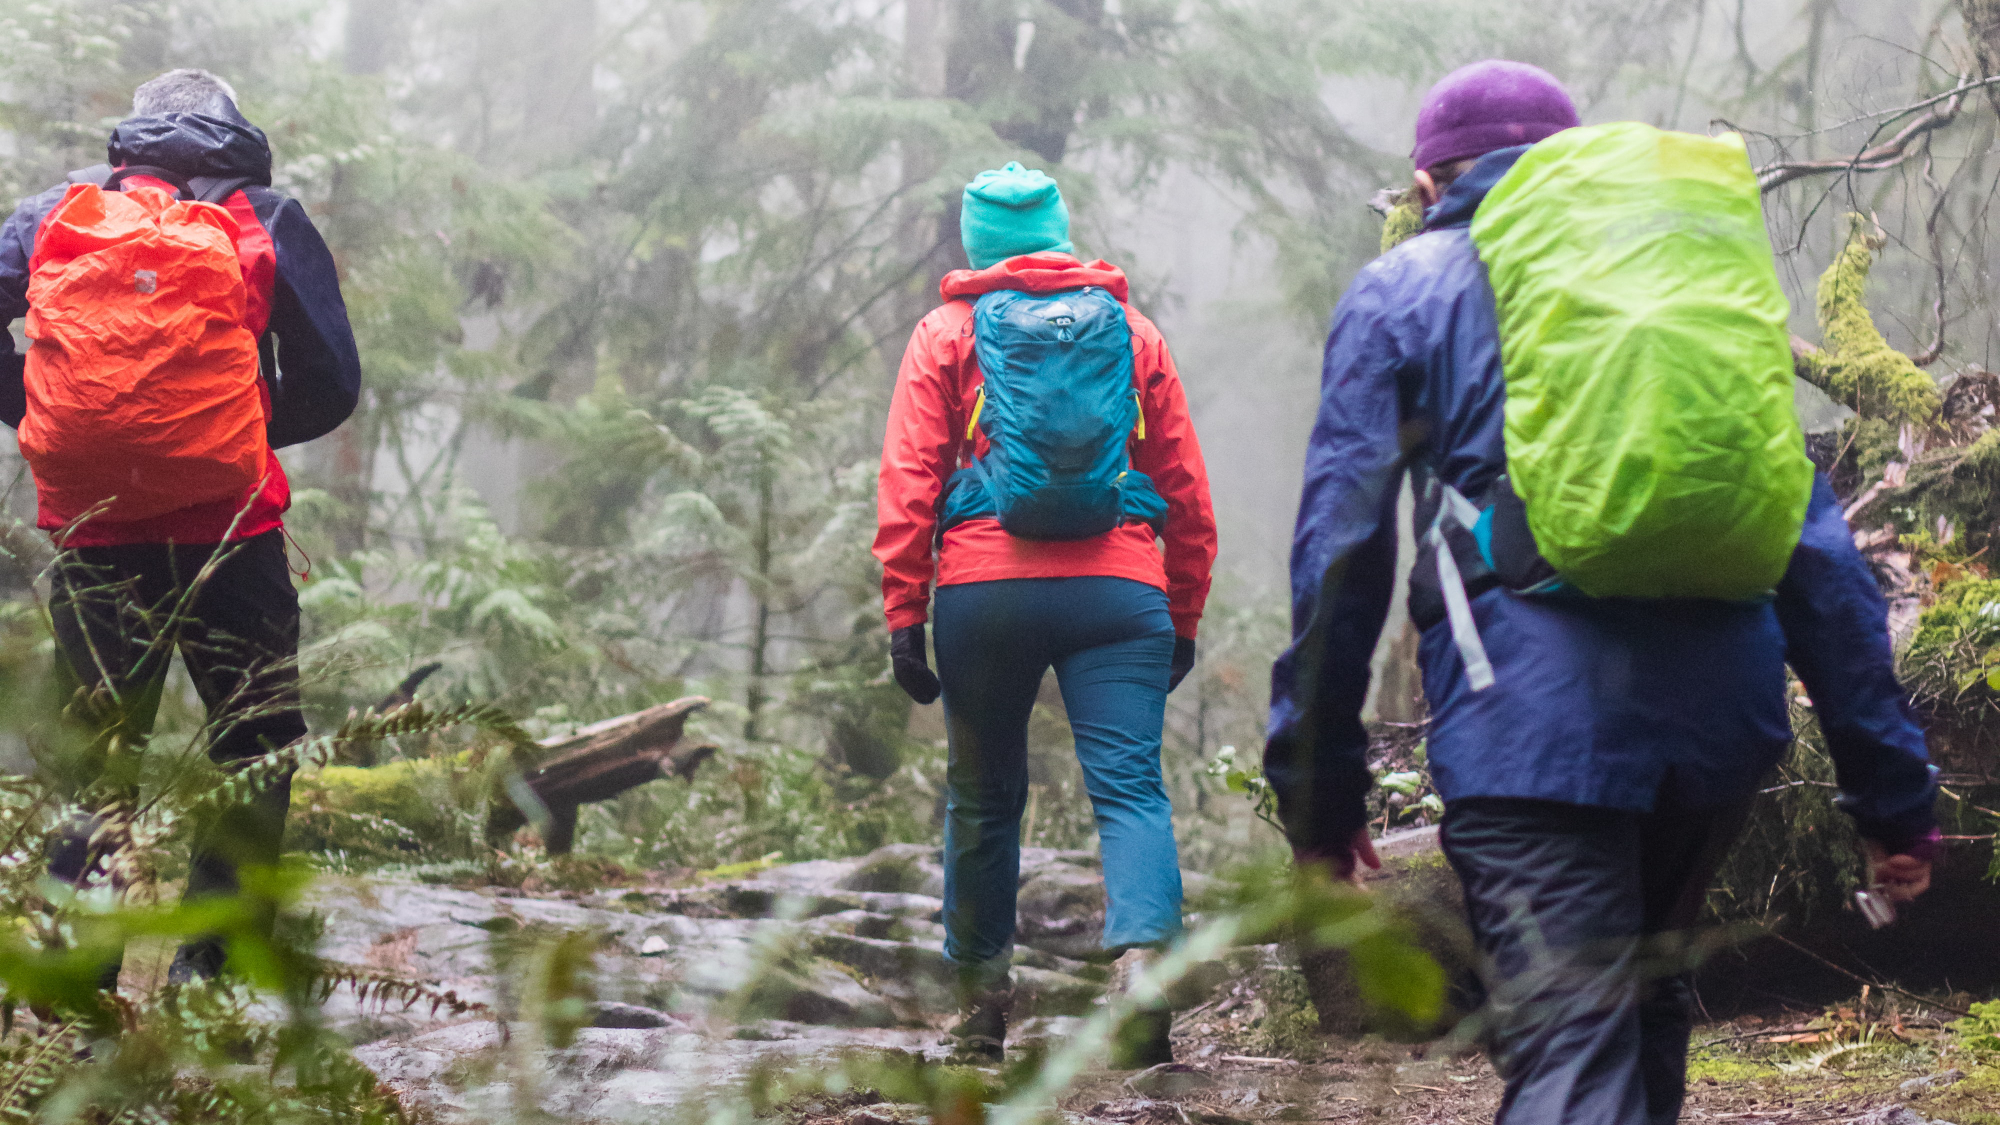 Three hikers in rain jackets and other rain gear, hiking through a wet forest, hopefully with well-maintained waterproofing.